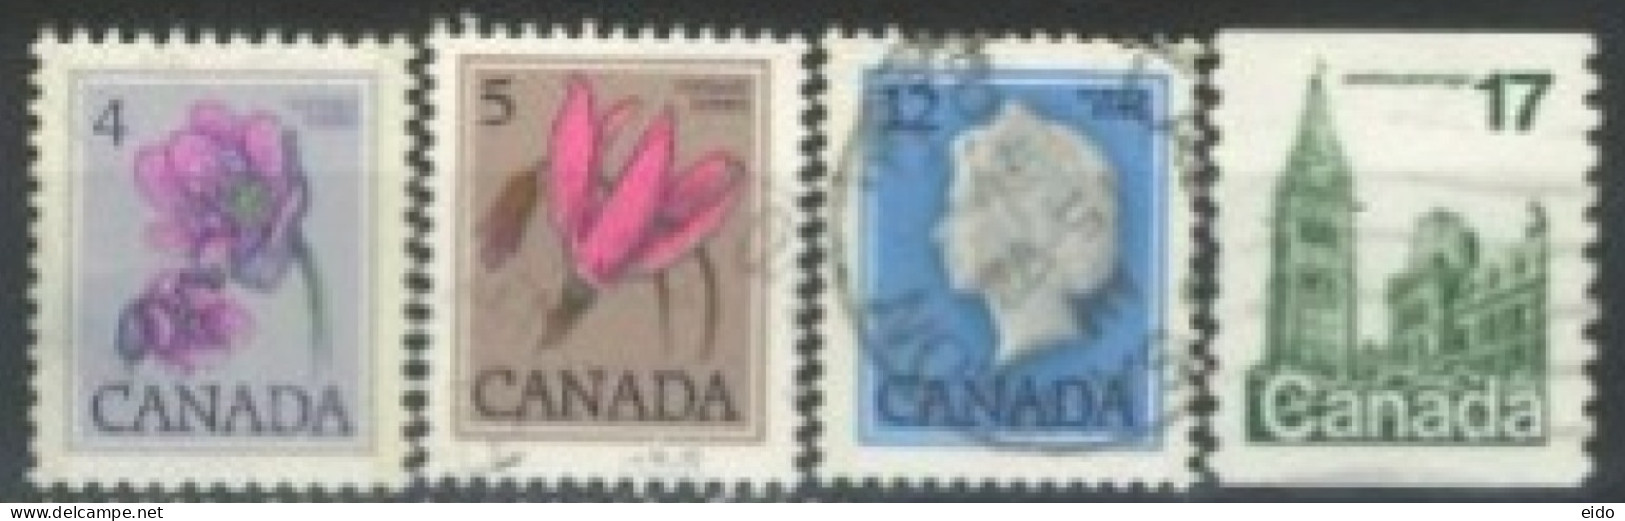 CANADA - 1977, QUEEN ELIZABETH II, FLOWERS & HOUSE OF PARLIAMENTSTAMPS SET OF 4, USED. - Usados